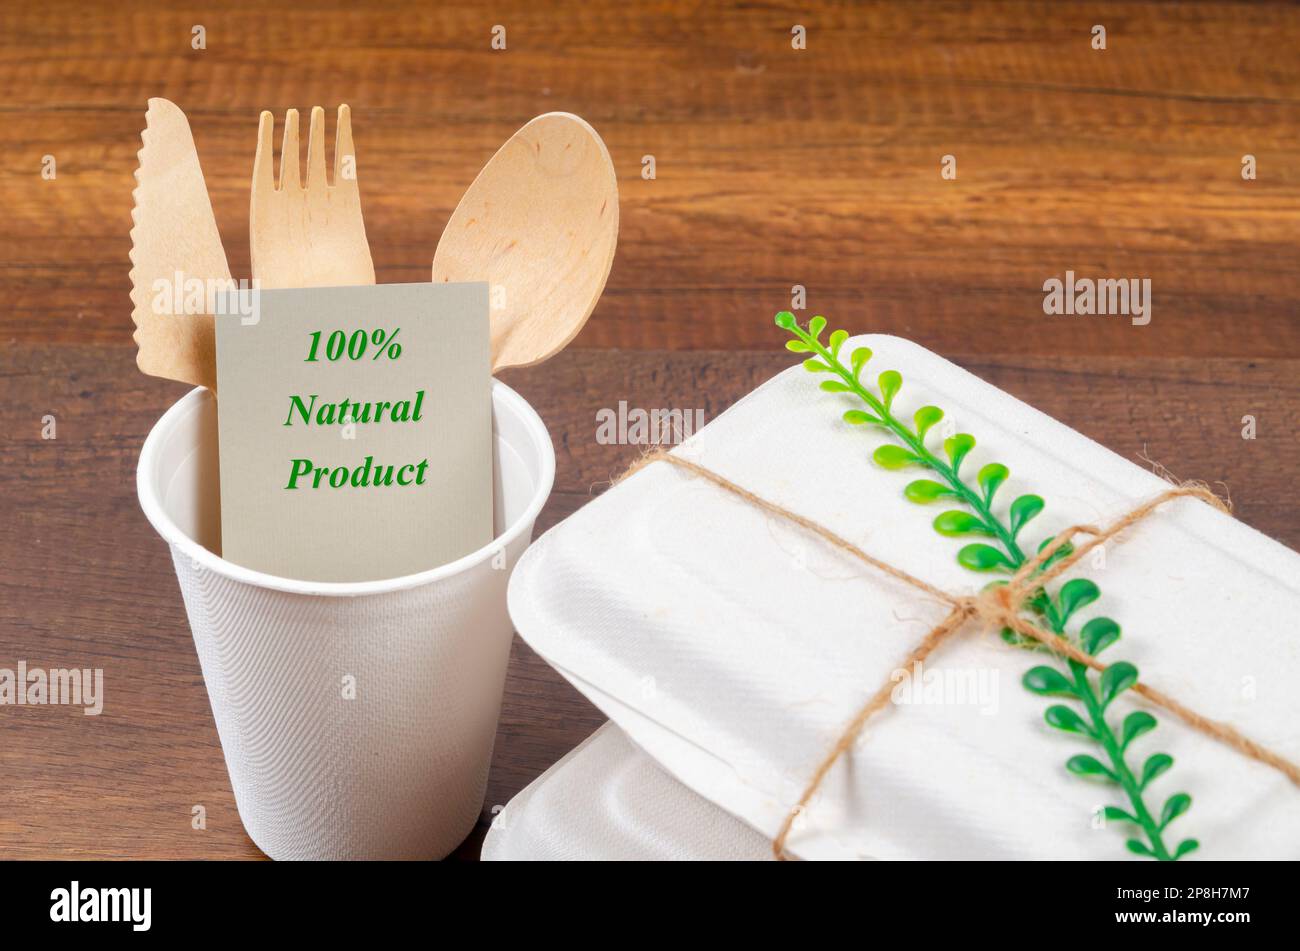 100% natural product with unbleached plant fiber food box and paper coffee cup. Natural fiber eco food and drink packaging. Stock Photo